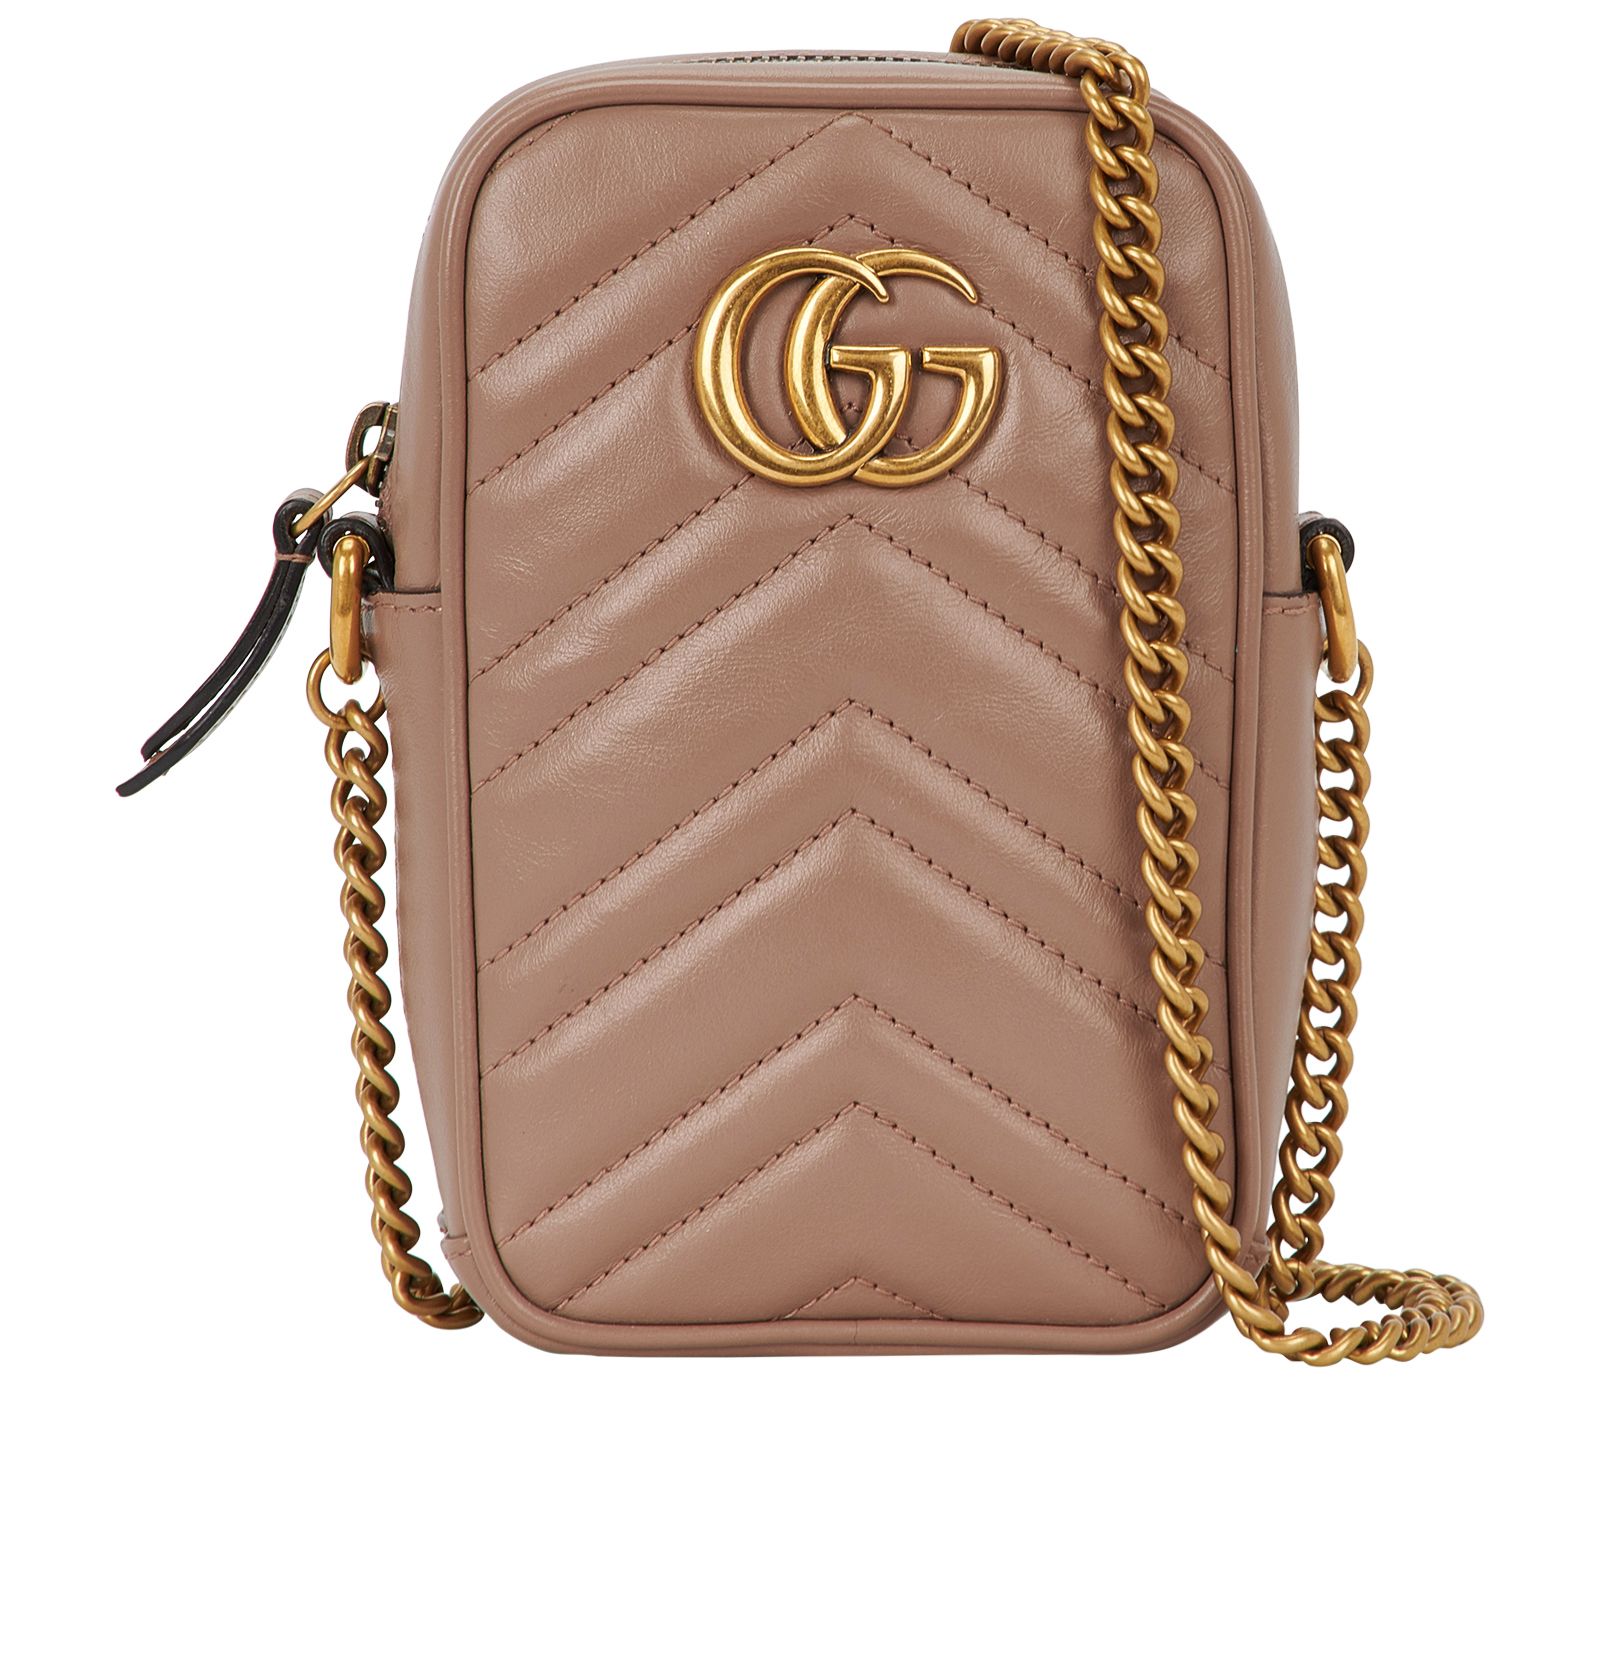 Gucci Clutch Bags, Shop our small Gucci clutch bags